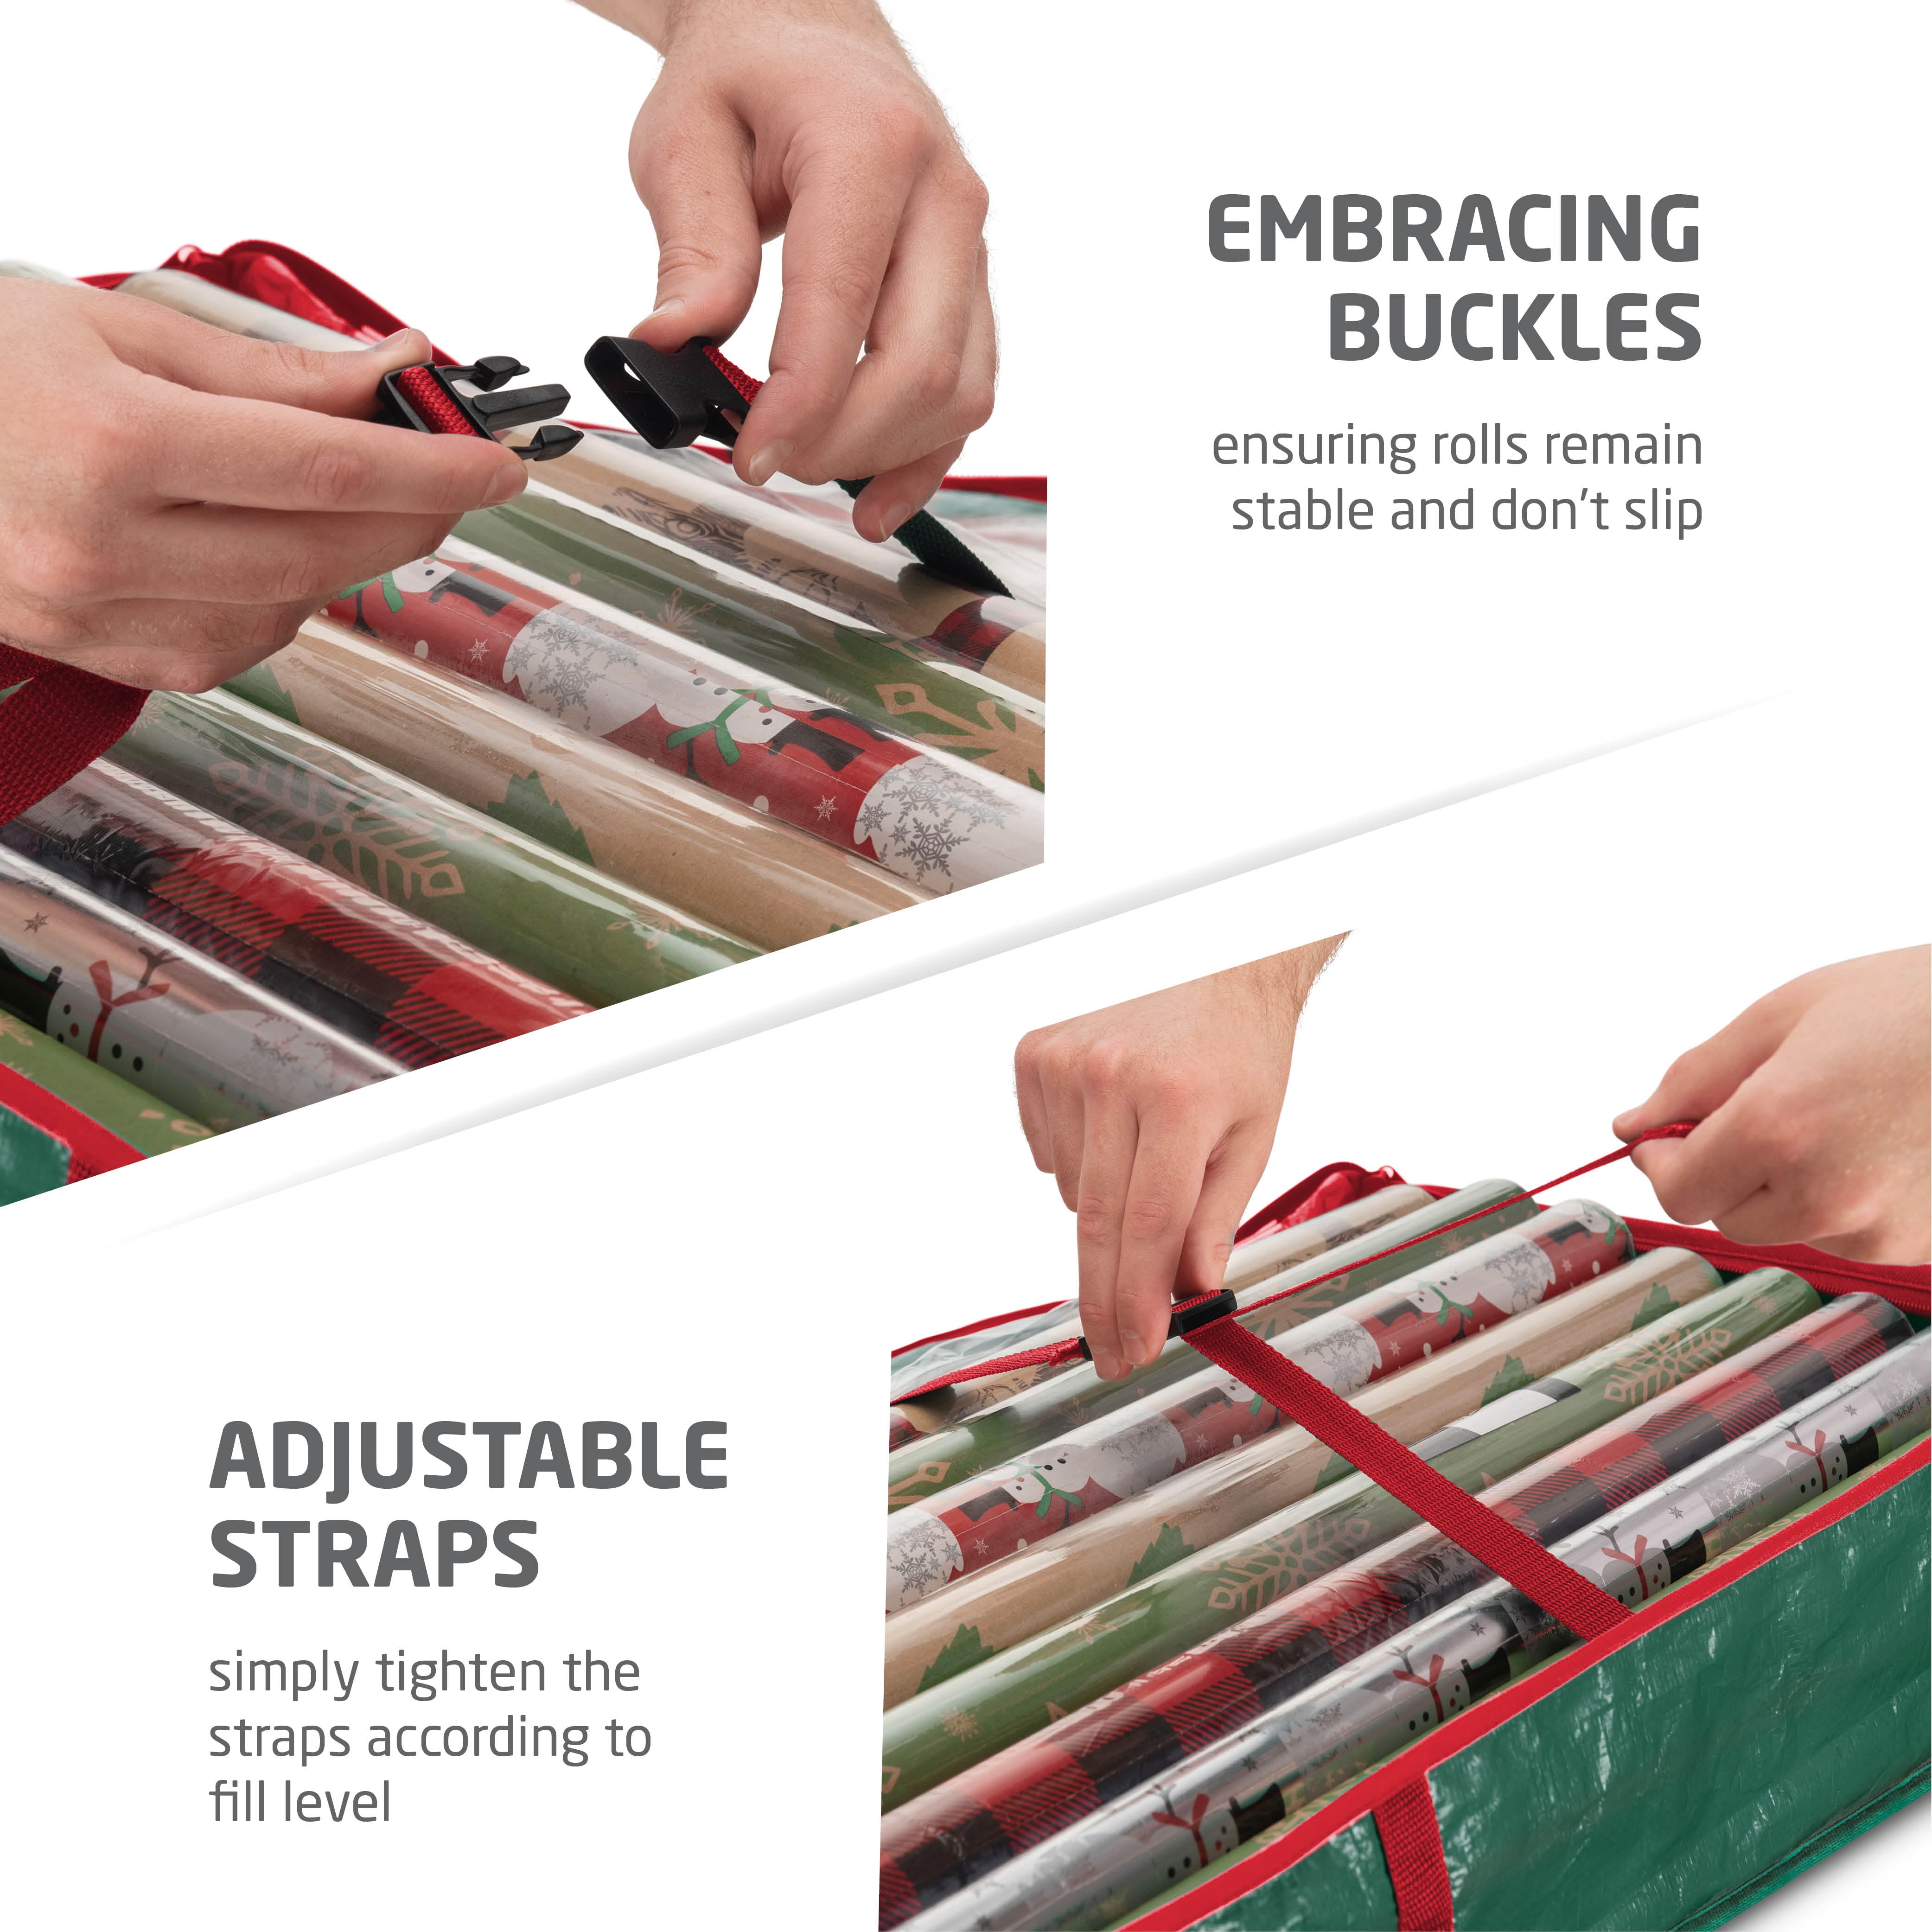 StorageBud Tear Proof Gift Wrapping Paper Storage Container